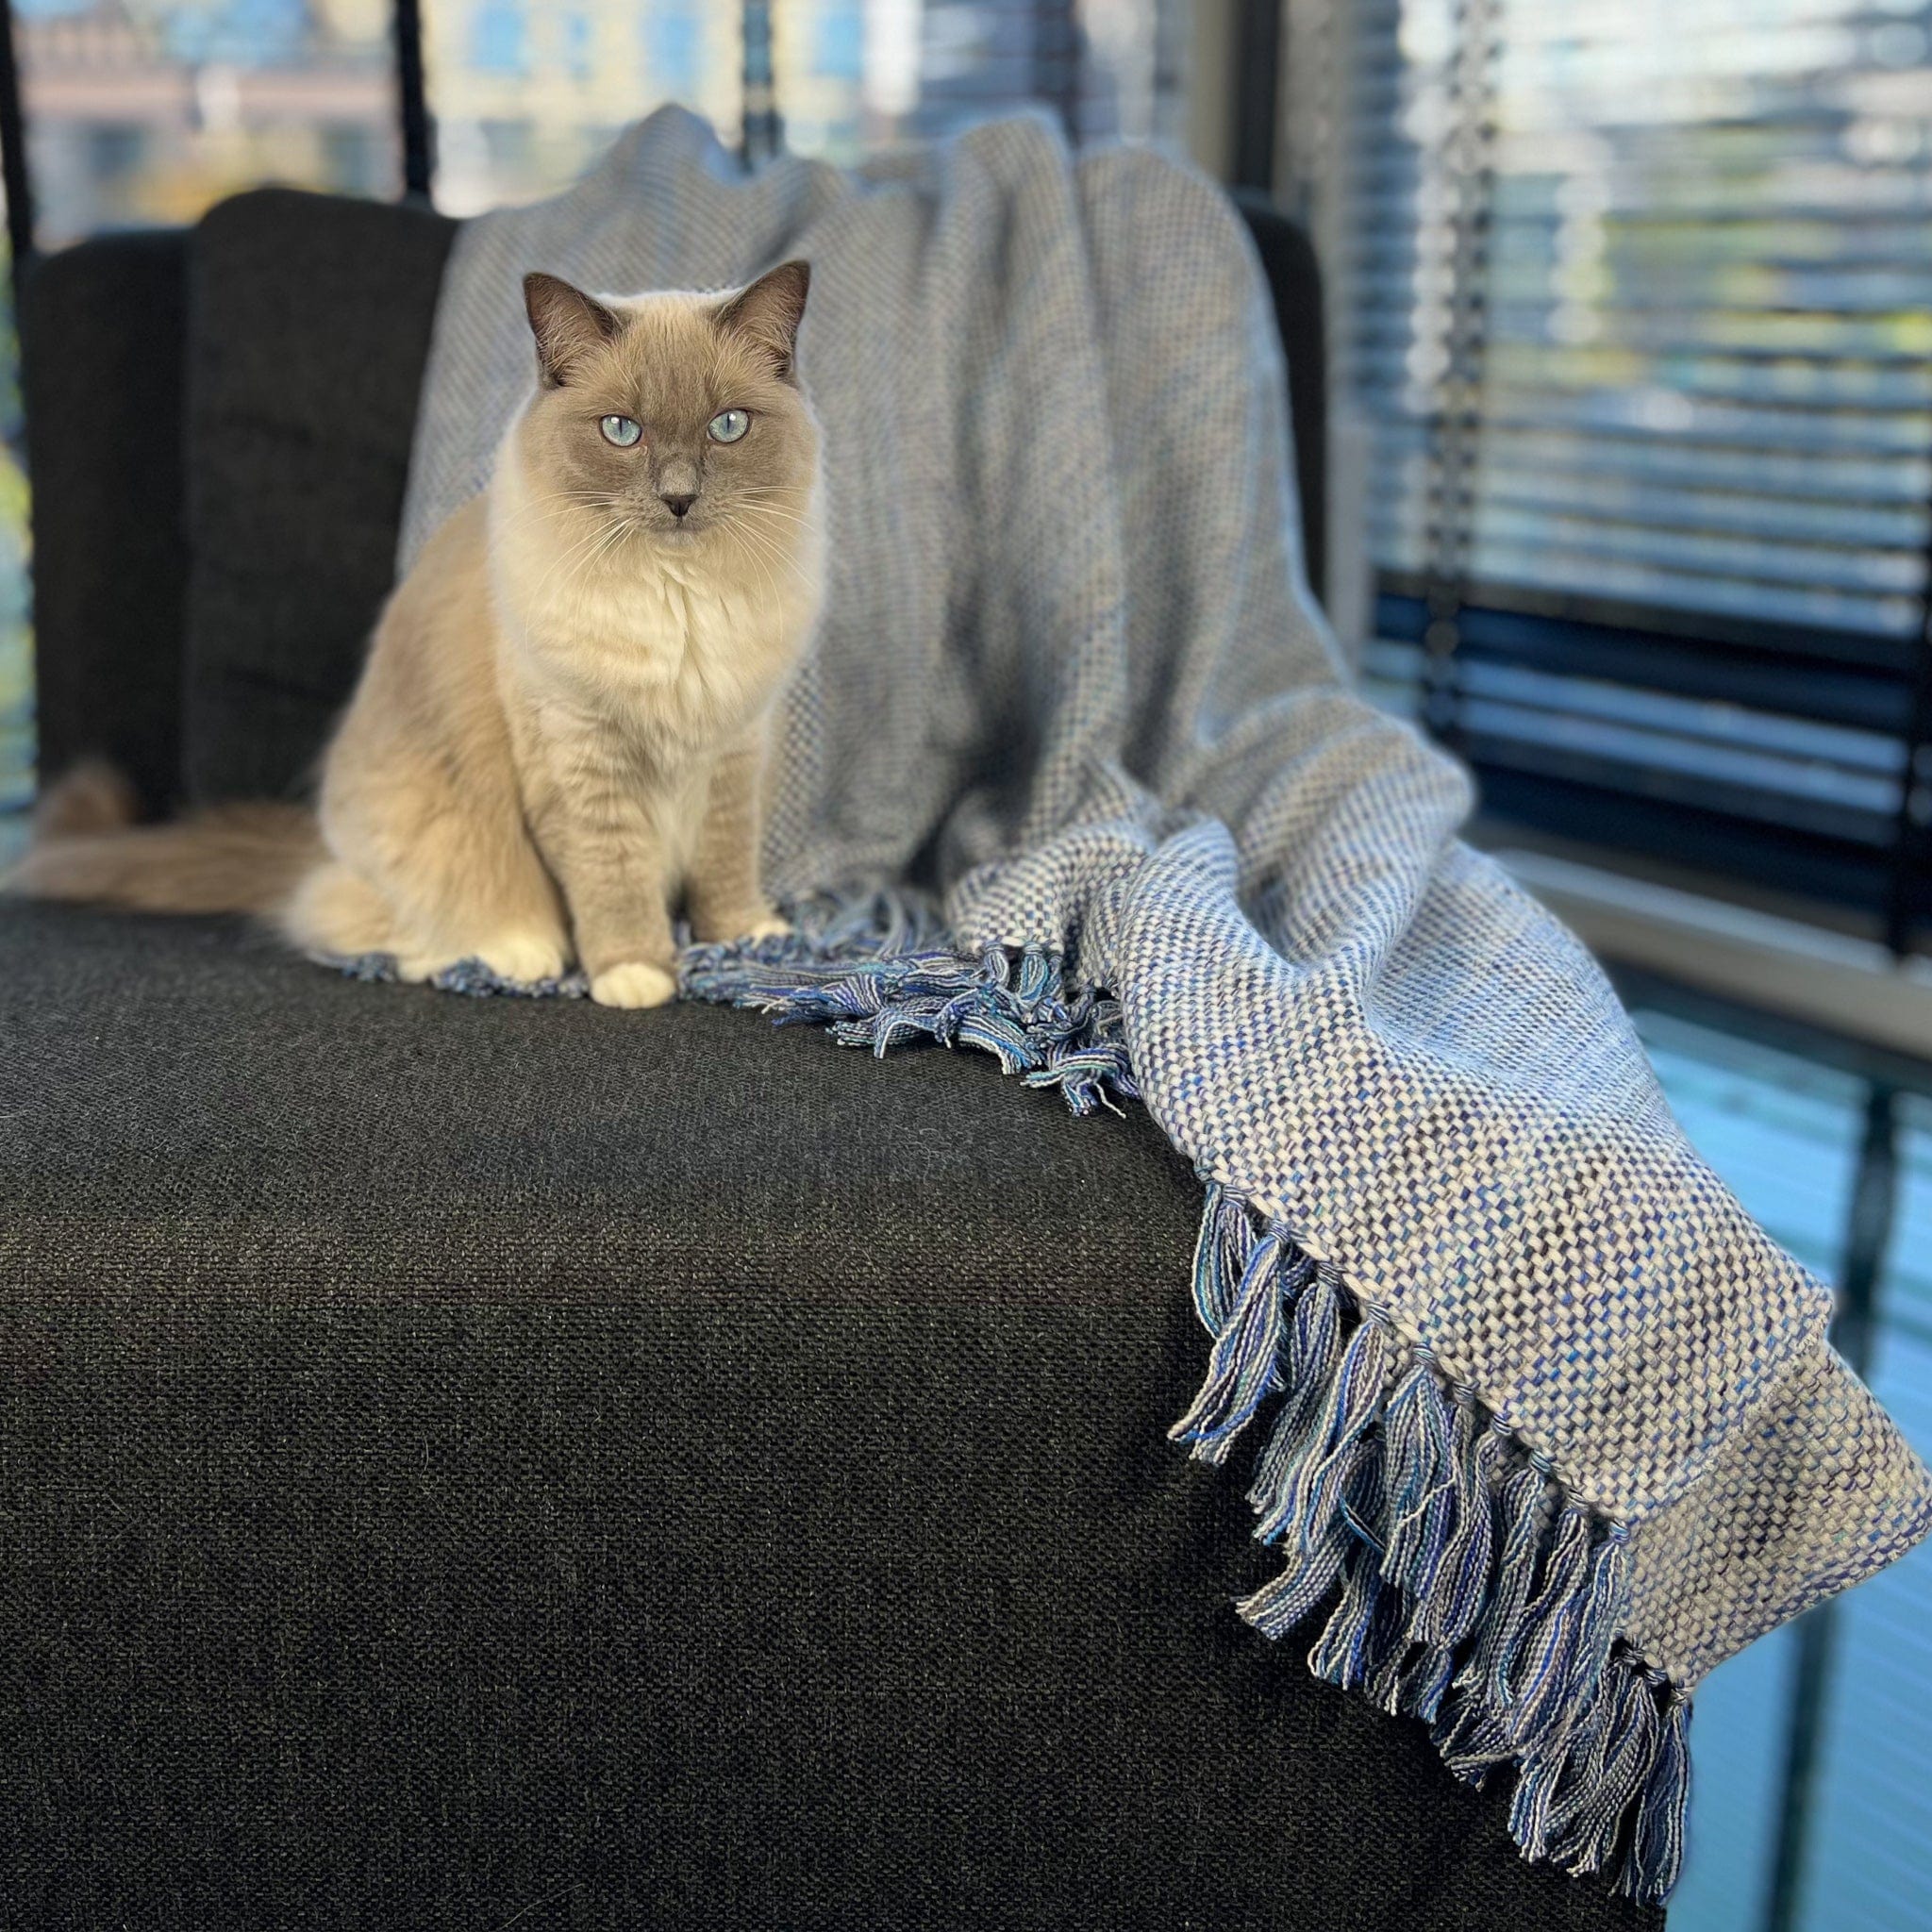 An Italian made Cashmere throw with a white weft and different shades of blue warp and with hand knotted tassels showing in front, draped on a dark grey chair with a white and grey cat with blue eyes sitting on the throw